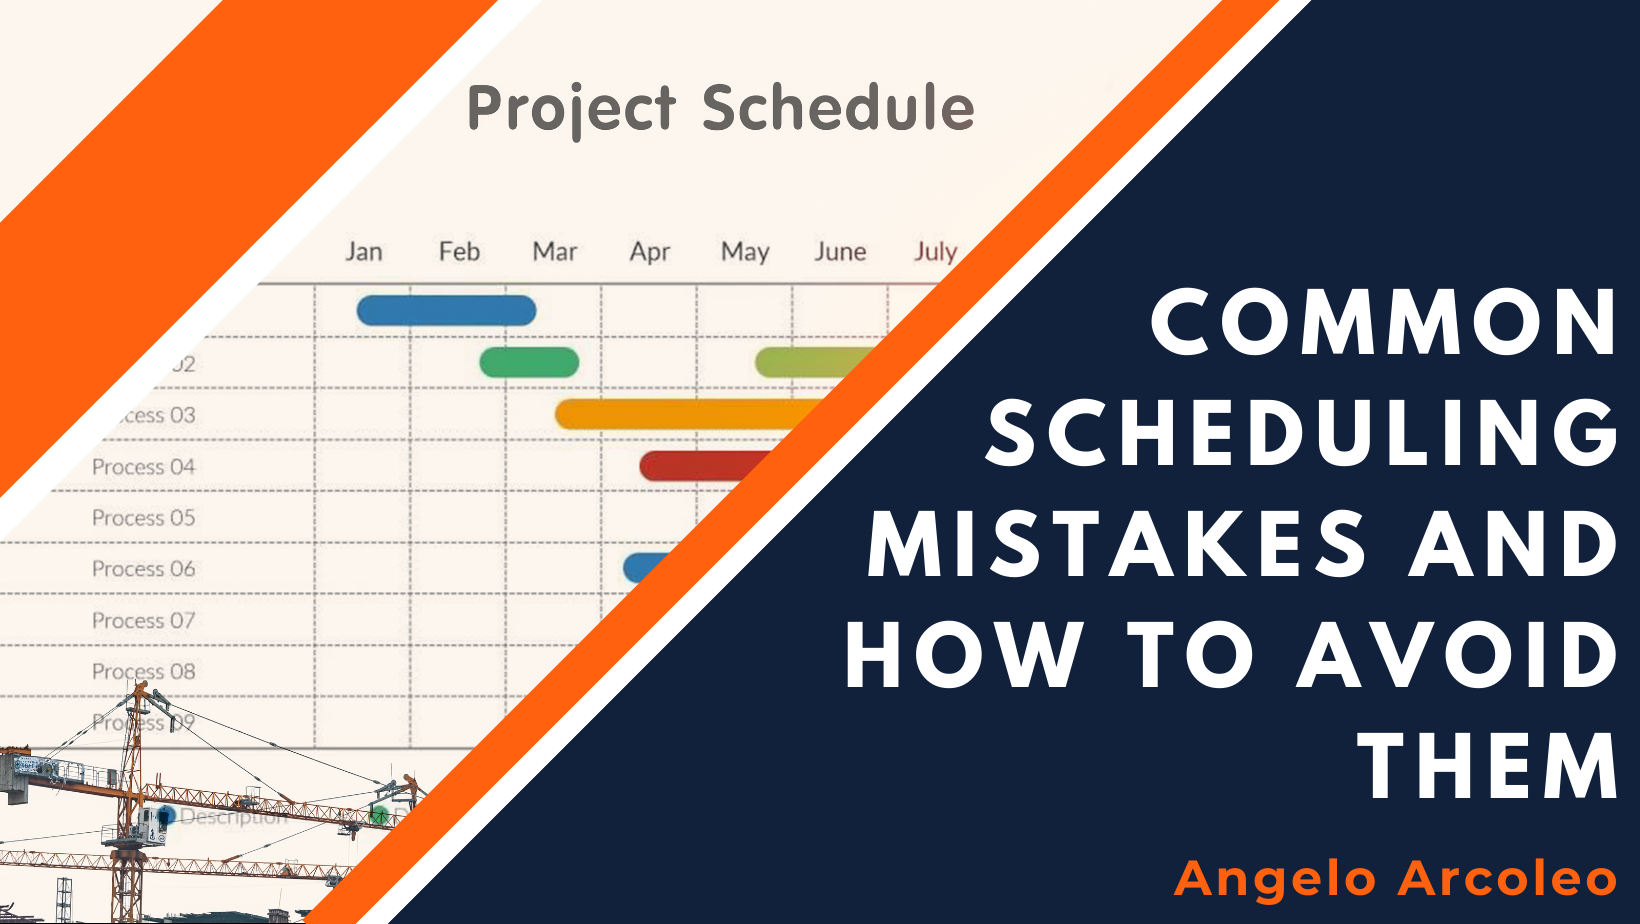 Common-Scheduling-Mistakes-and-How-to-Avoid-Them.png